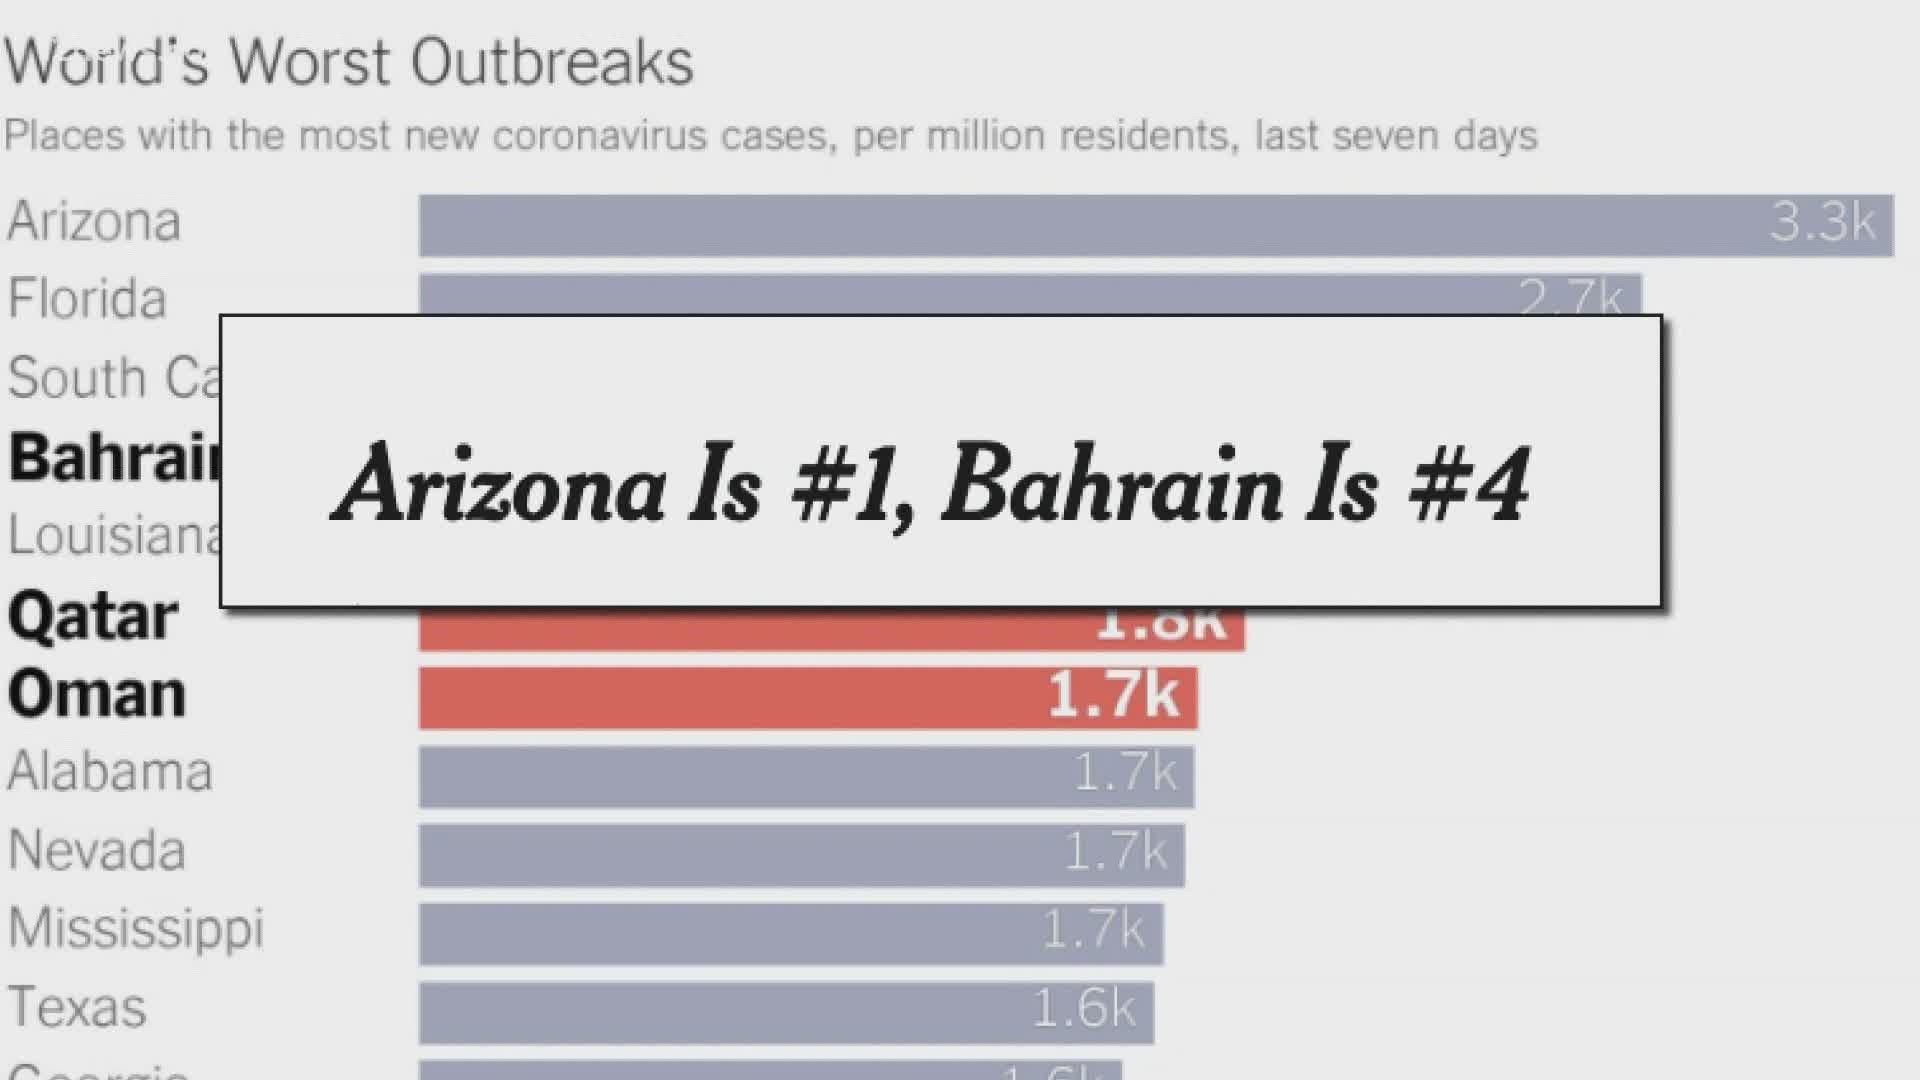 Arizona has had more new virus cases per capita over the last week than any country in the world, according to the NYT. Gov Ducey says this is misleading information